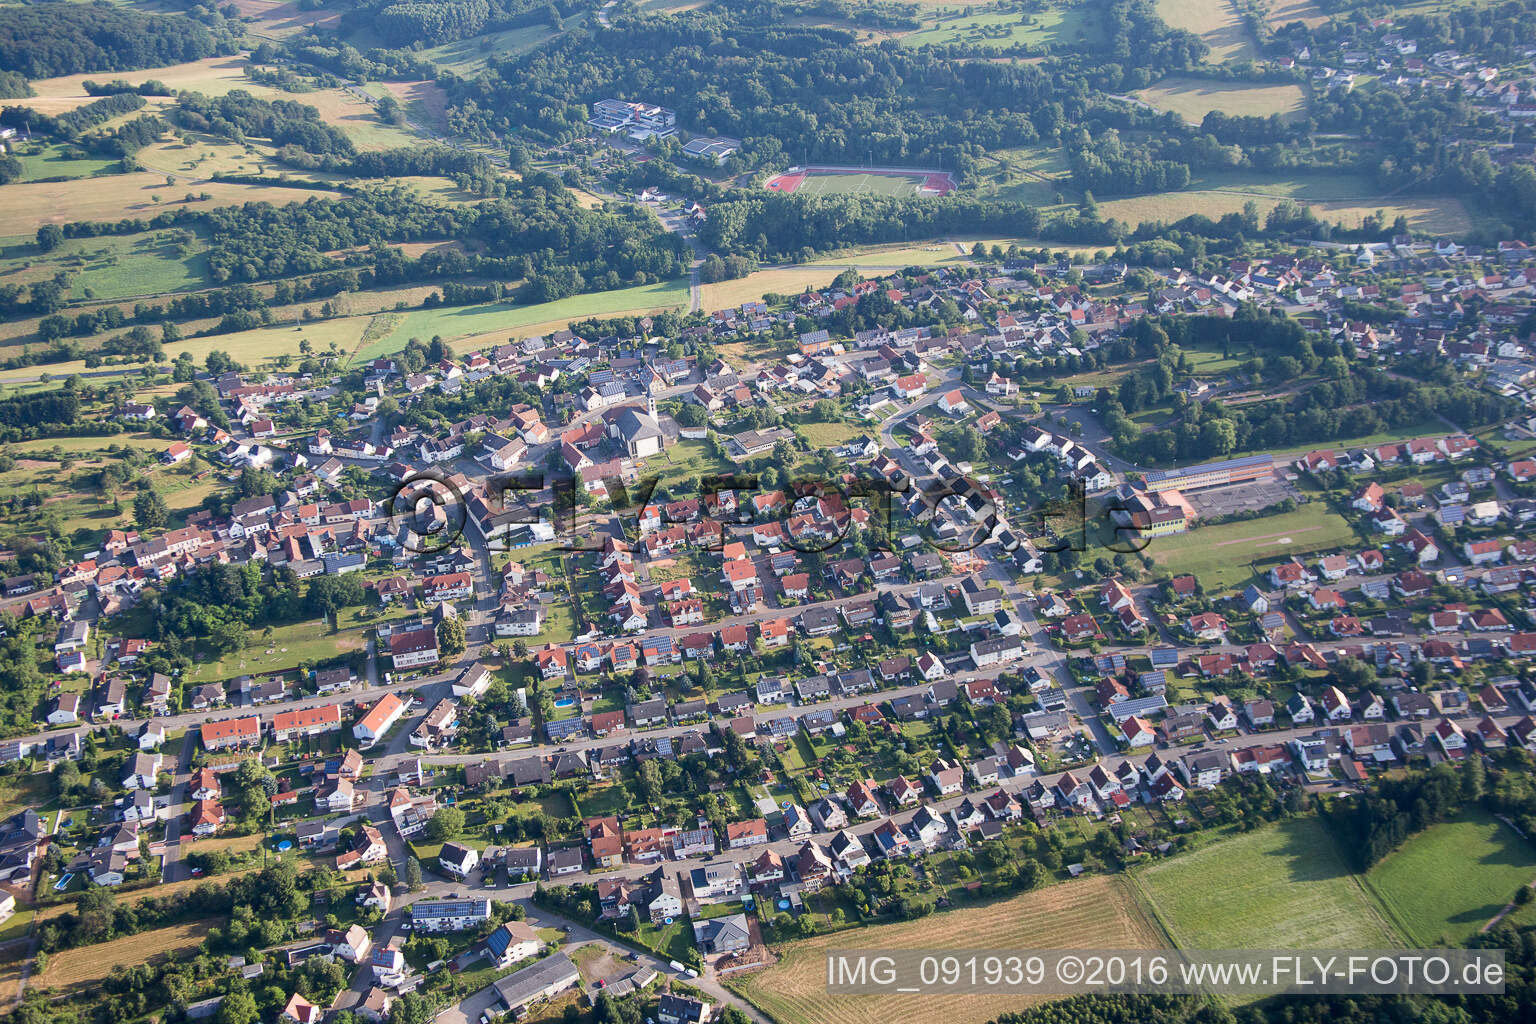 Aerial view of Town View of the streets and houses of the residential areas in Schoenenberg-Kuebelberg in the state Rhineland-Palatinate, Germany